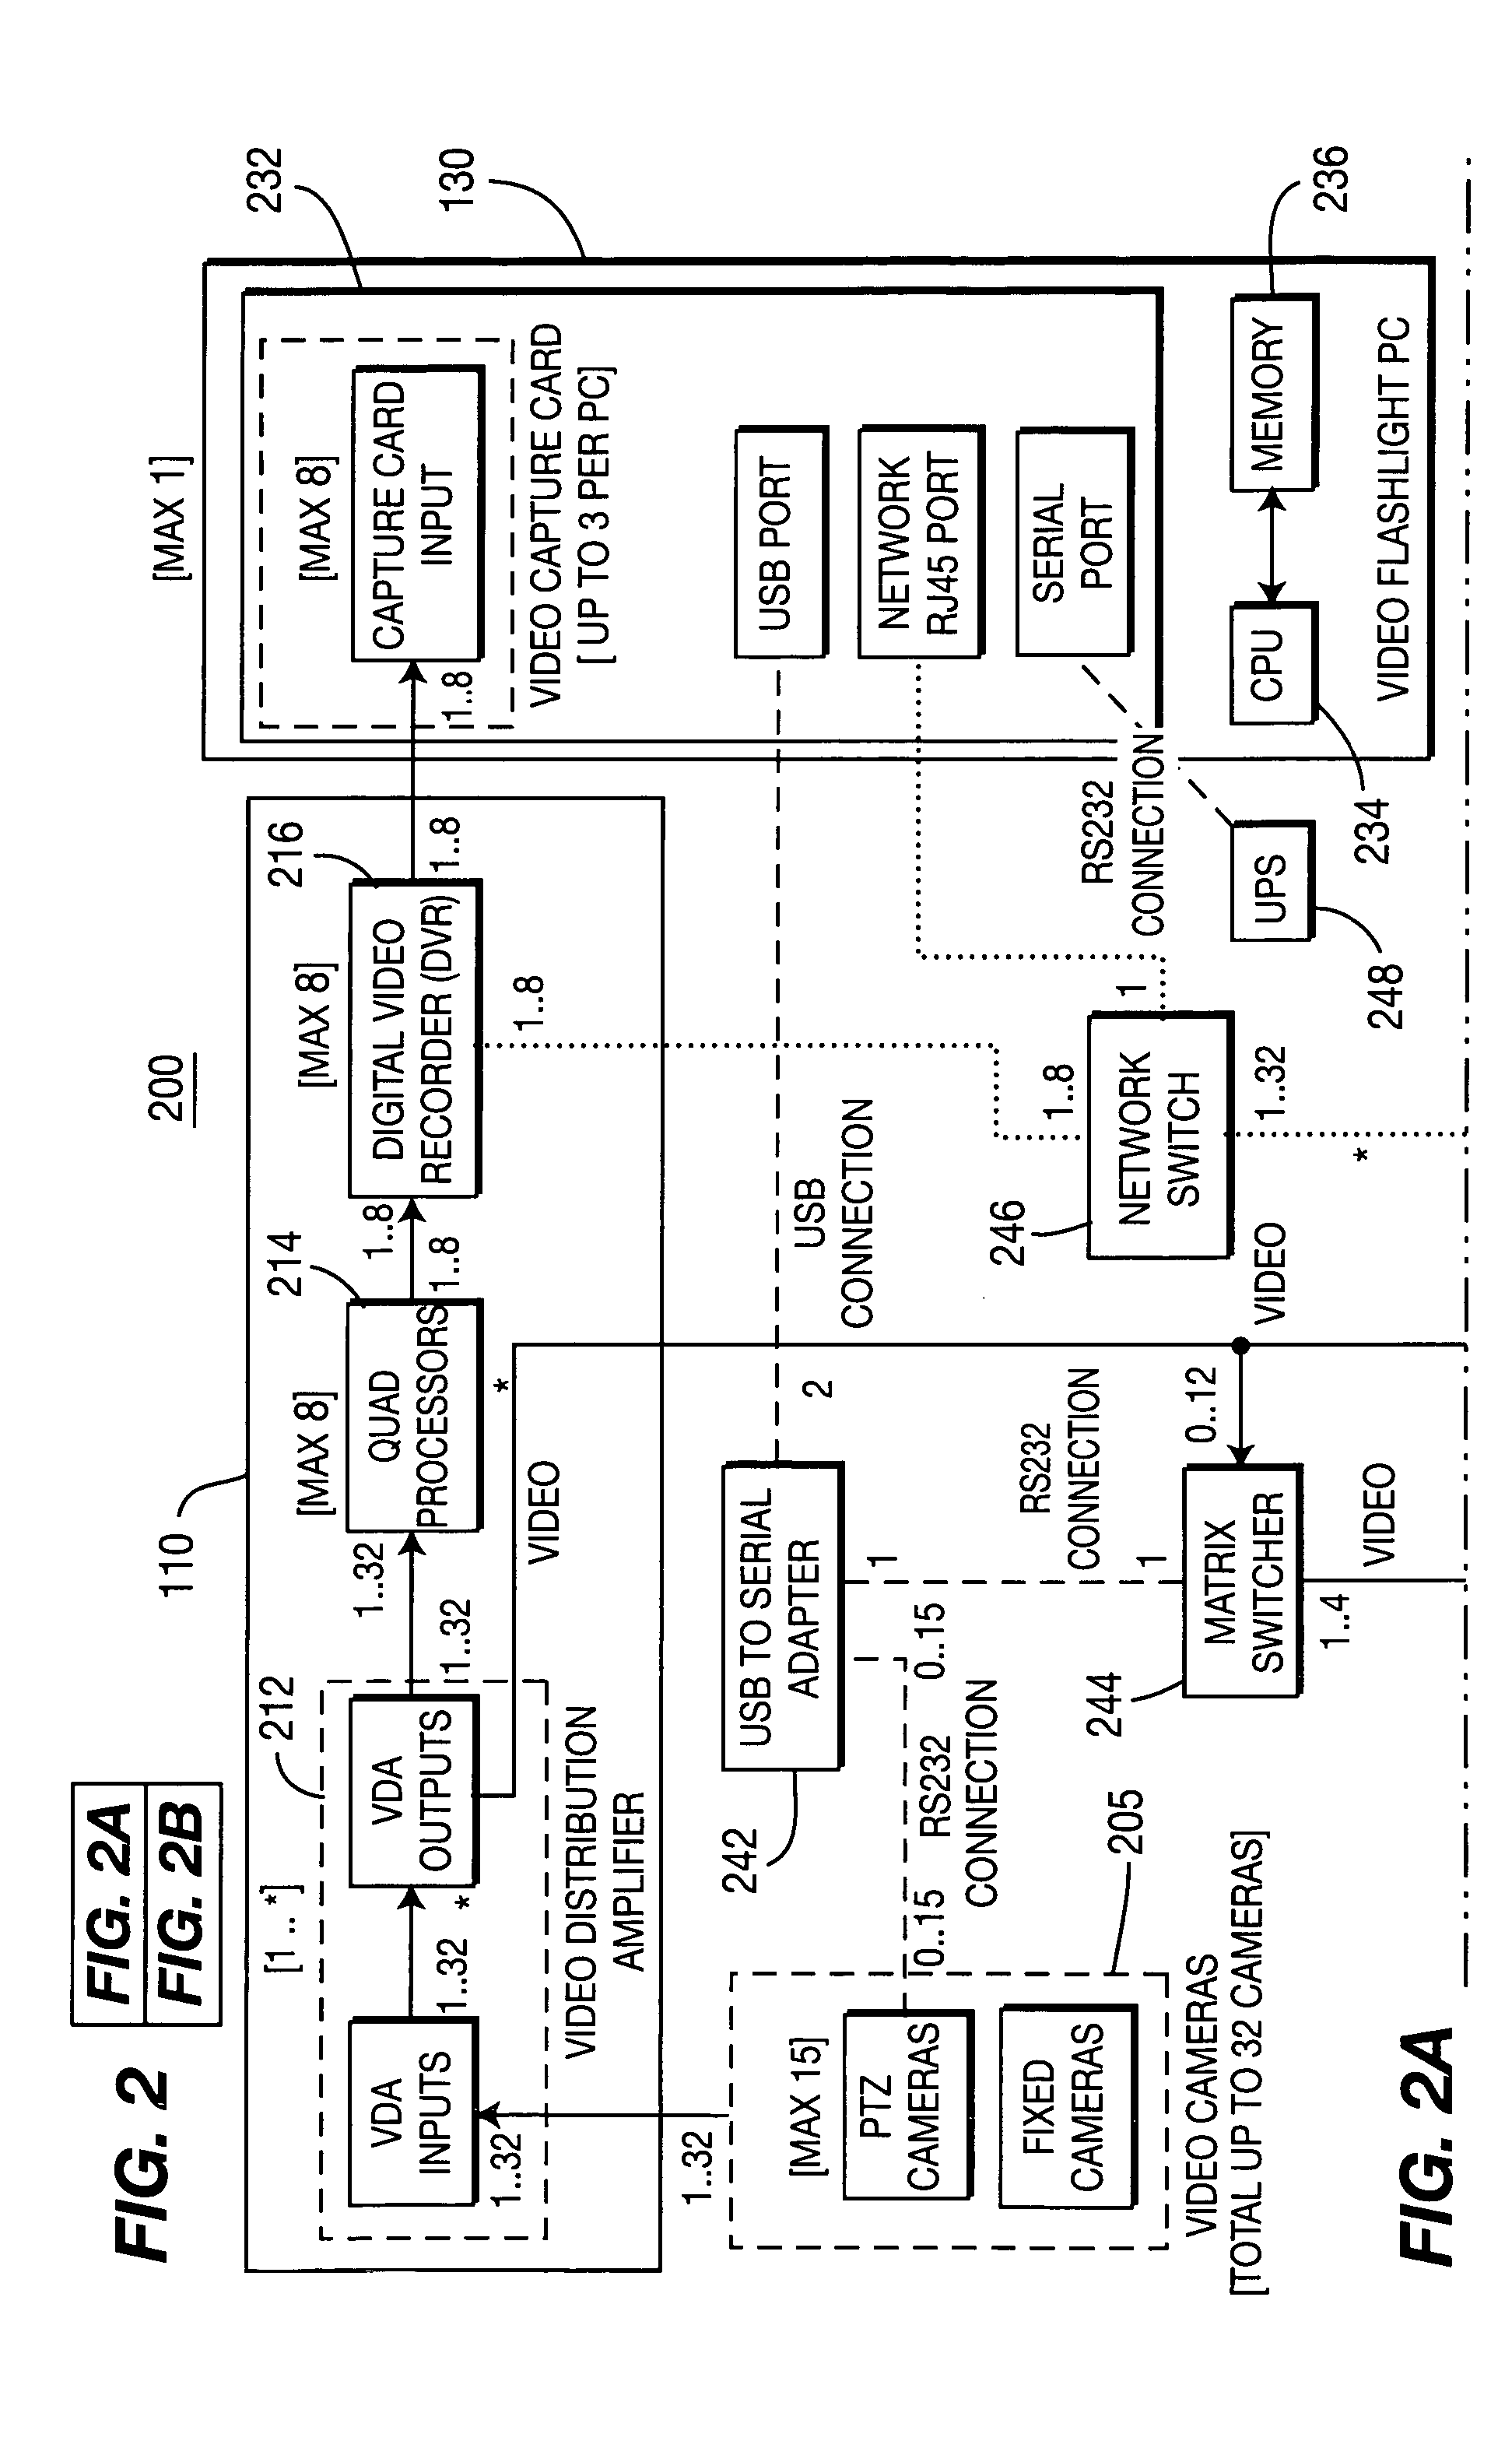 Method and apparatus for providing a scalable multi-camera distributed video processing and visualization surveillance system